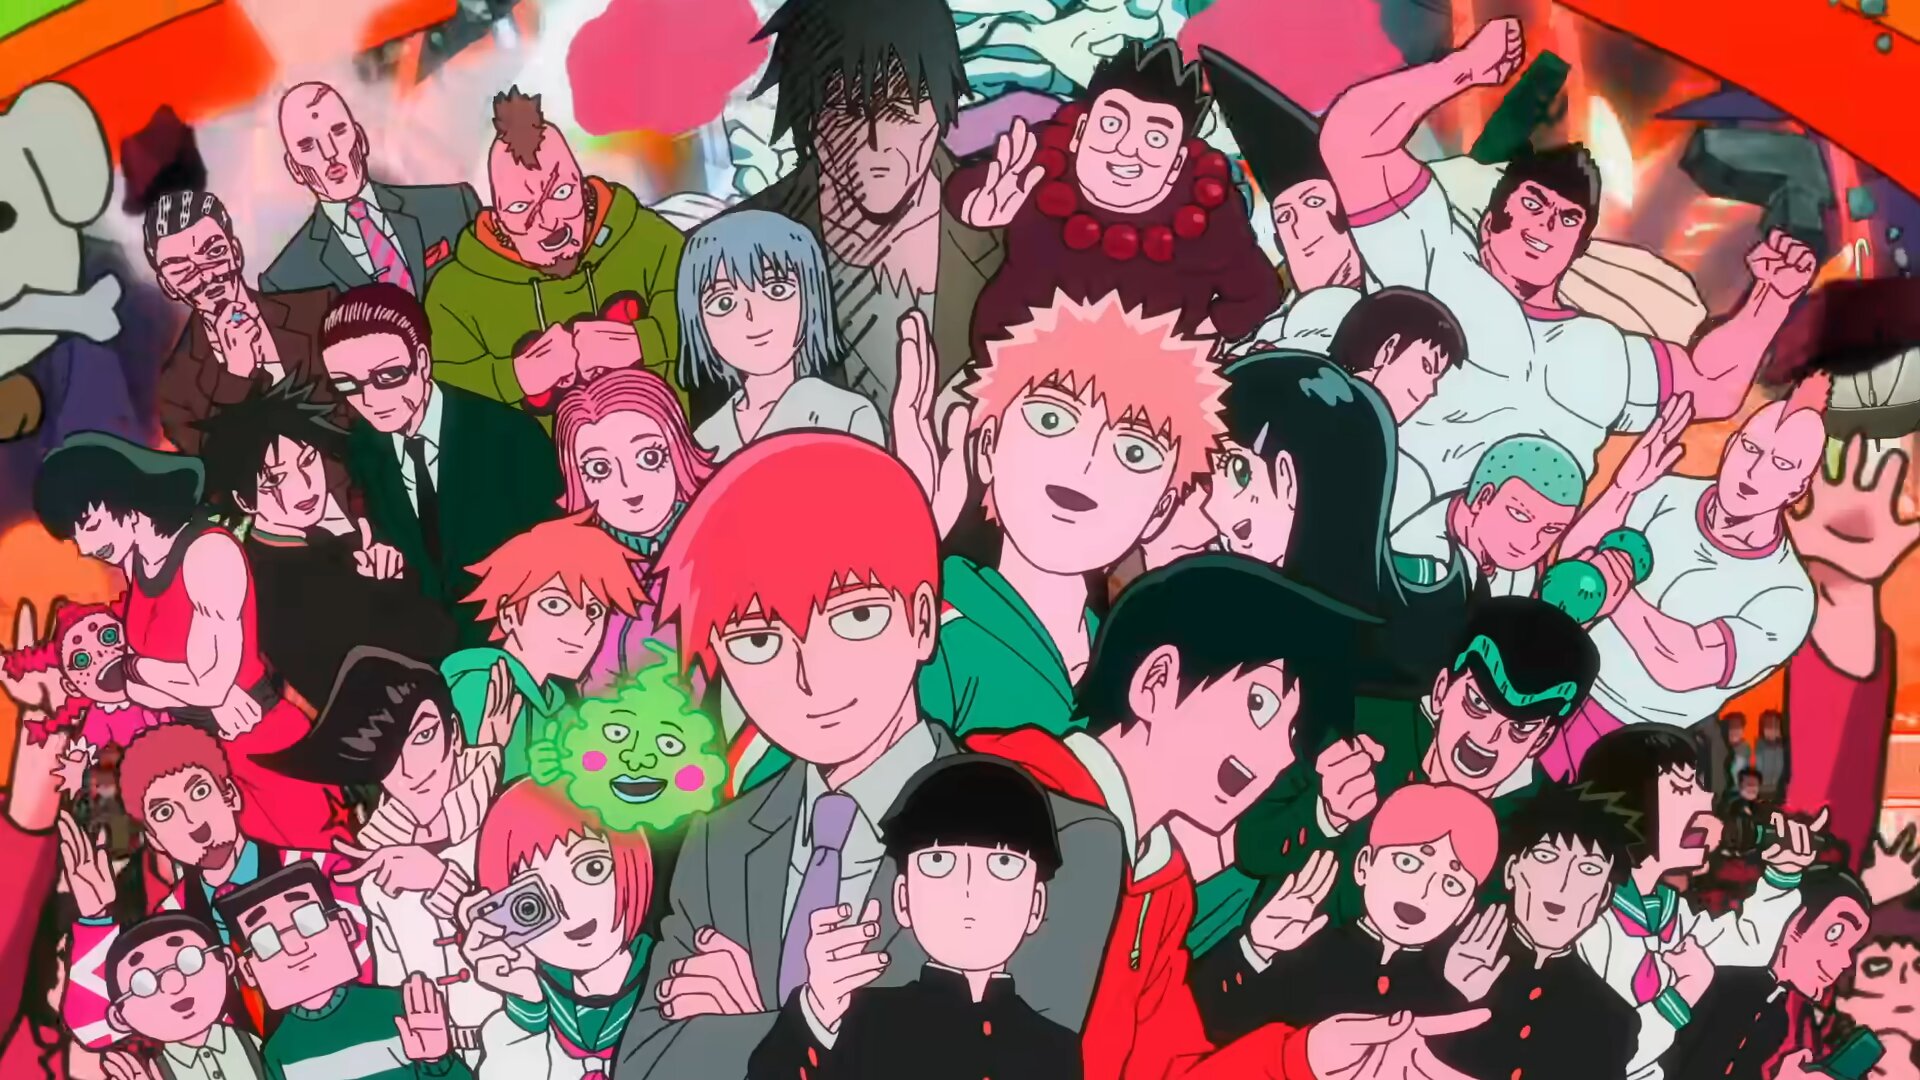 Mob Psycho 100 III Episode 1 Review - About The Future